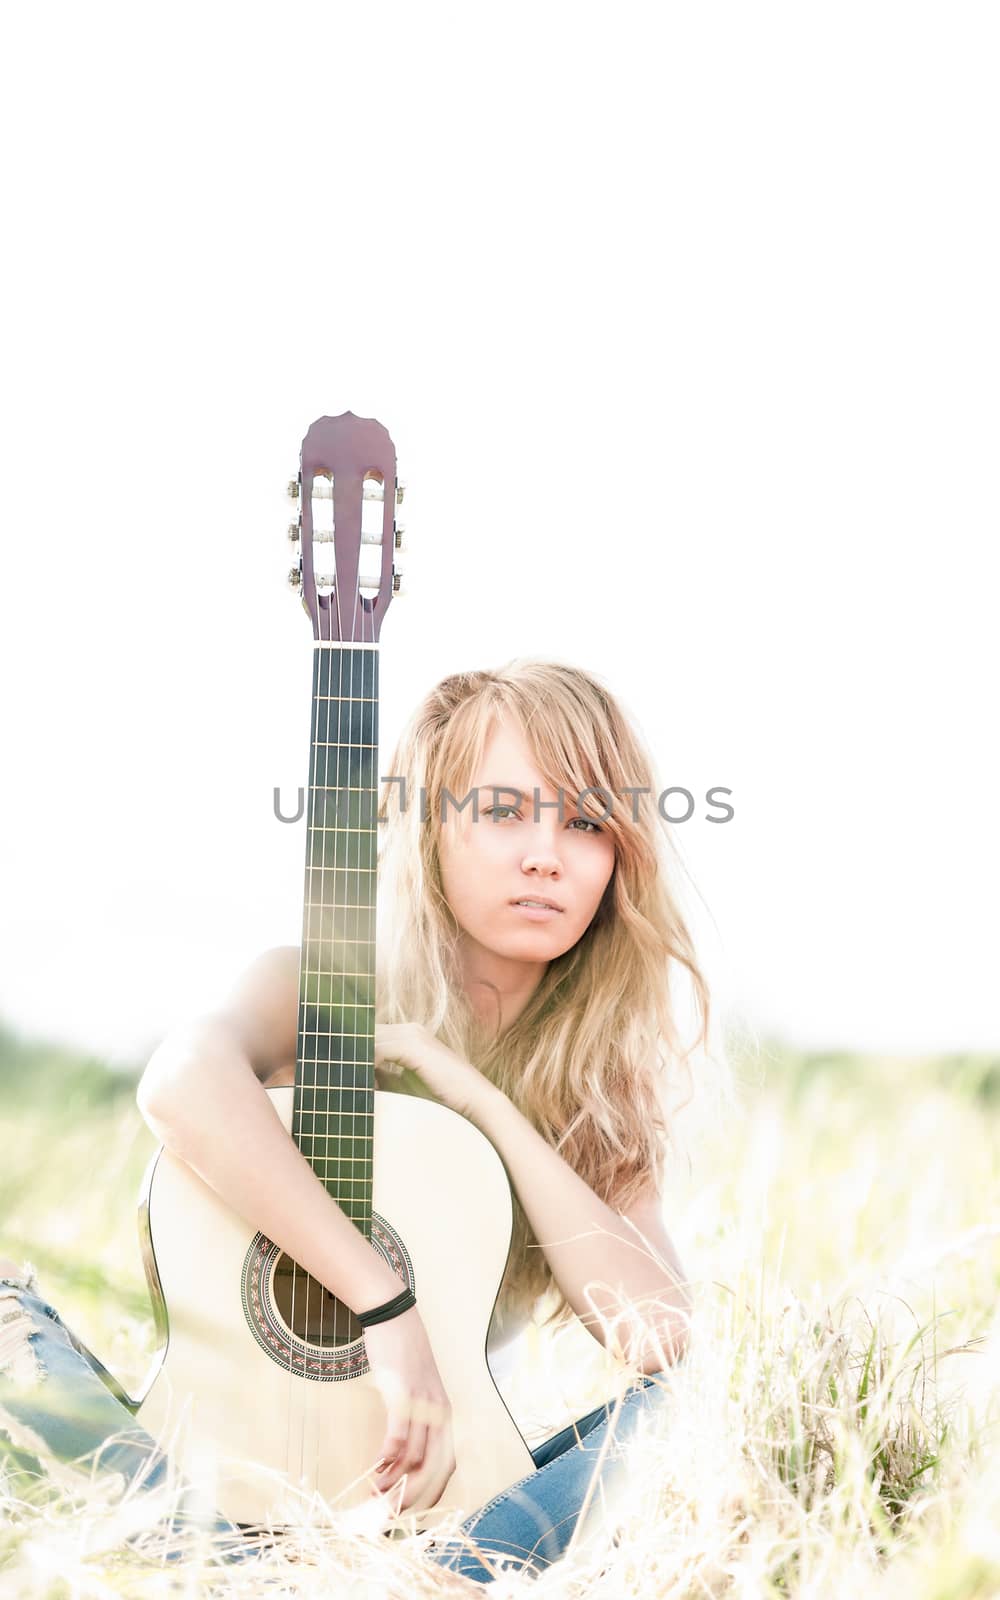 Pretty girl with guitar sitting on ground. Beautiful woman with blonde hair holding musical instrument and smiling. Green grass as background. Sunny summer day. Outdoor activity for young people.